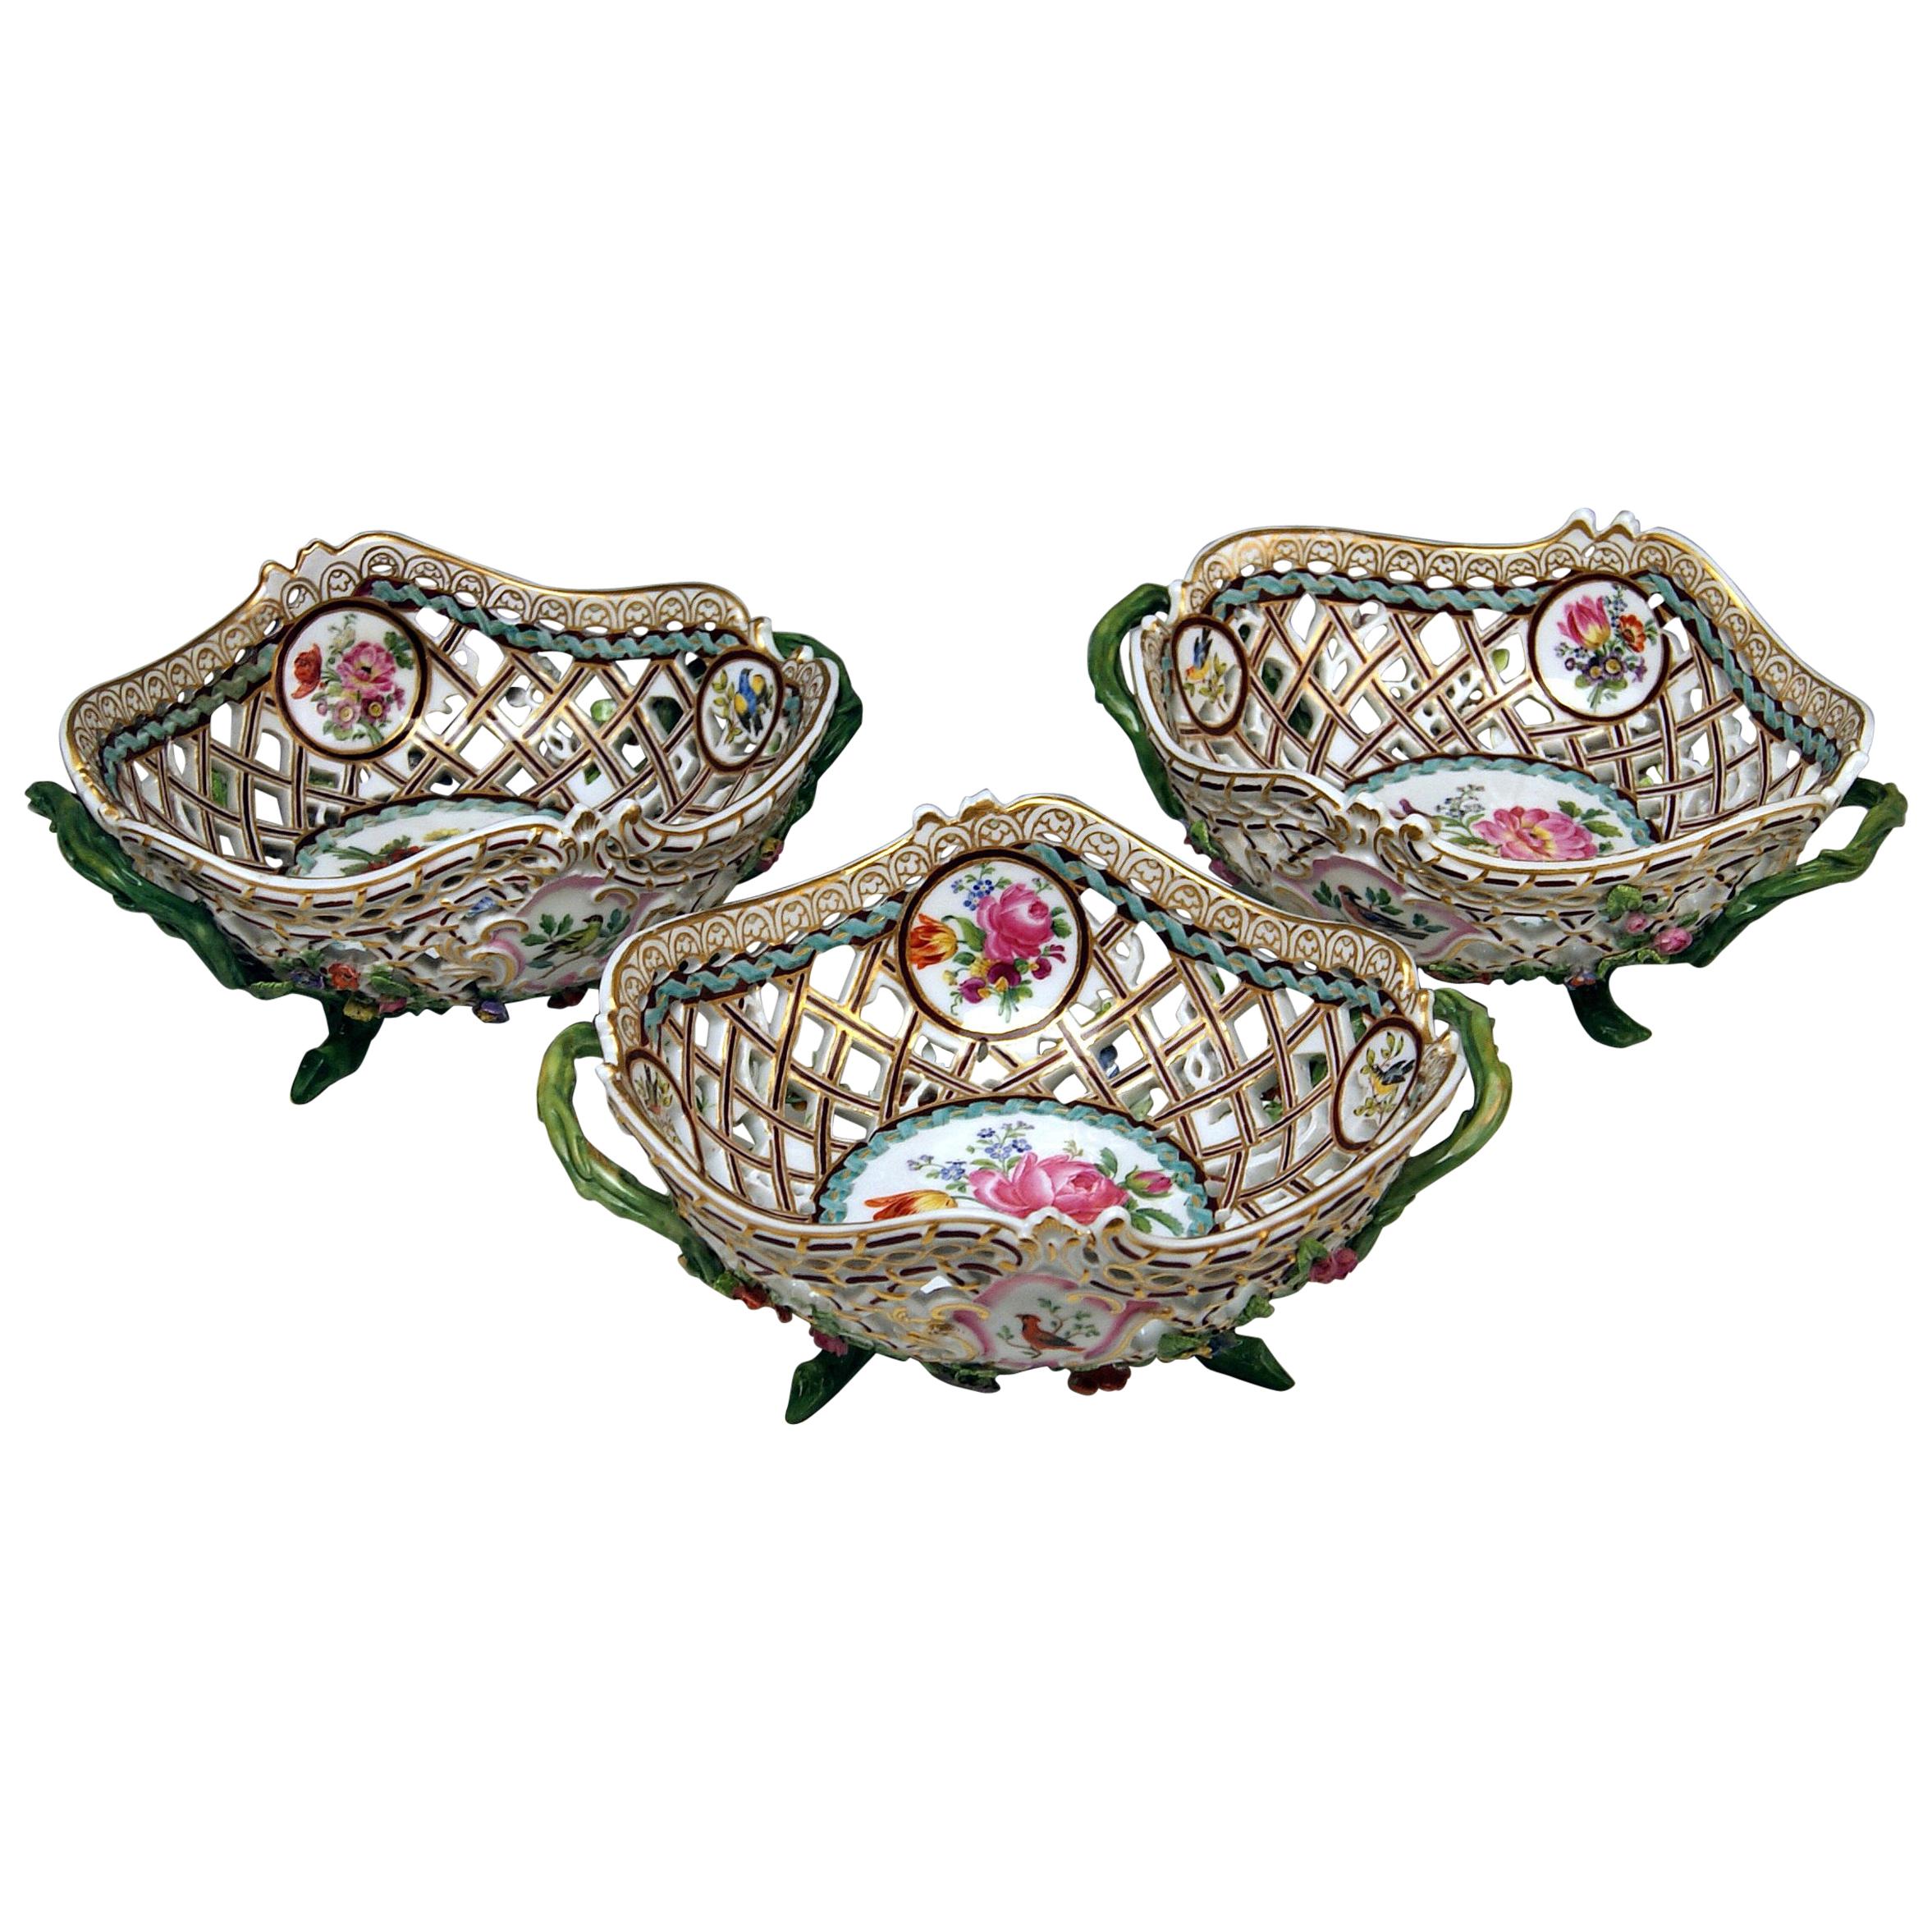 Meissen Set of Three Oval Reticulated Basket Bowls with Flowers, circa 1850